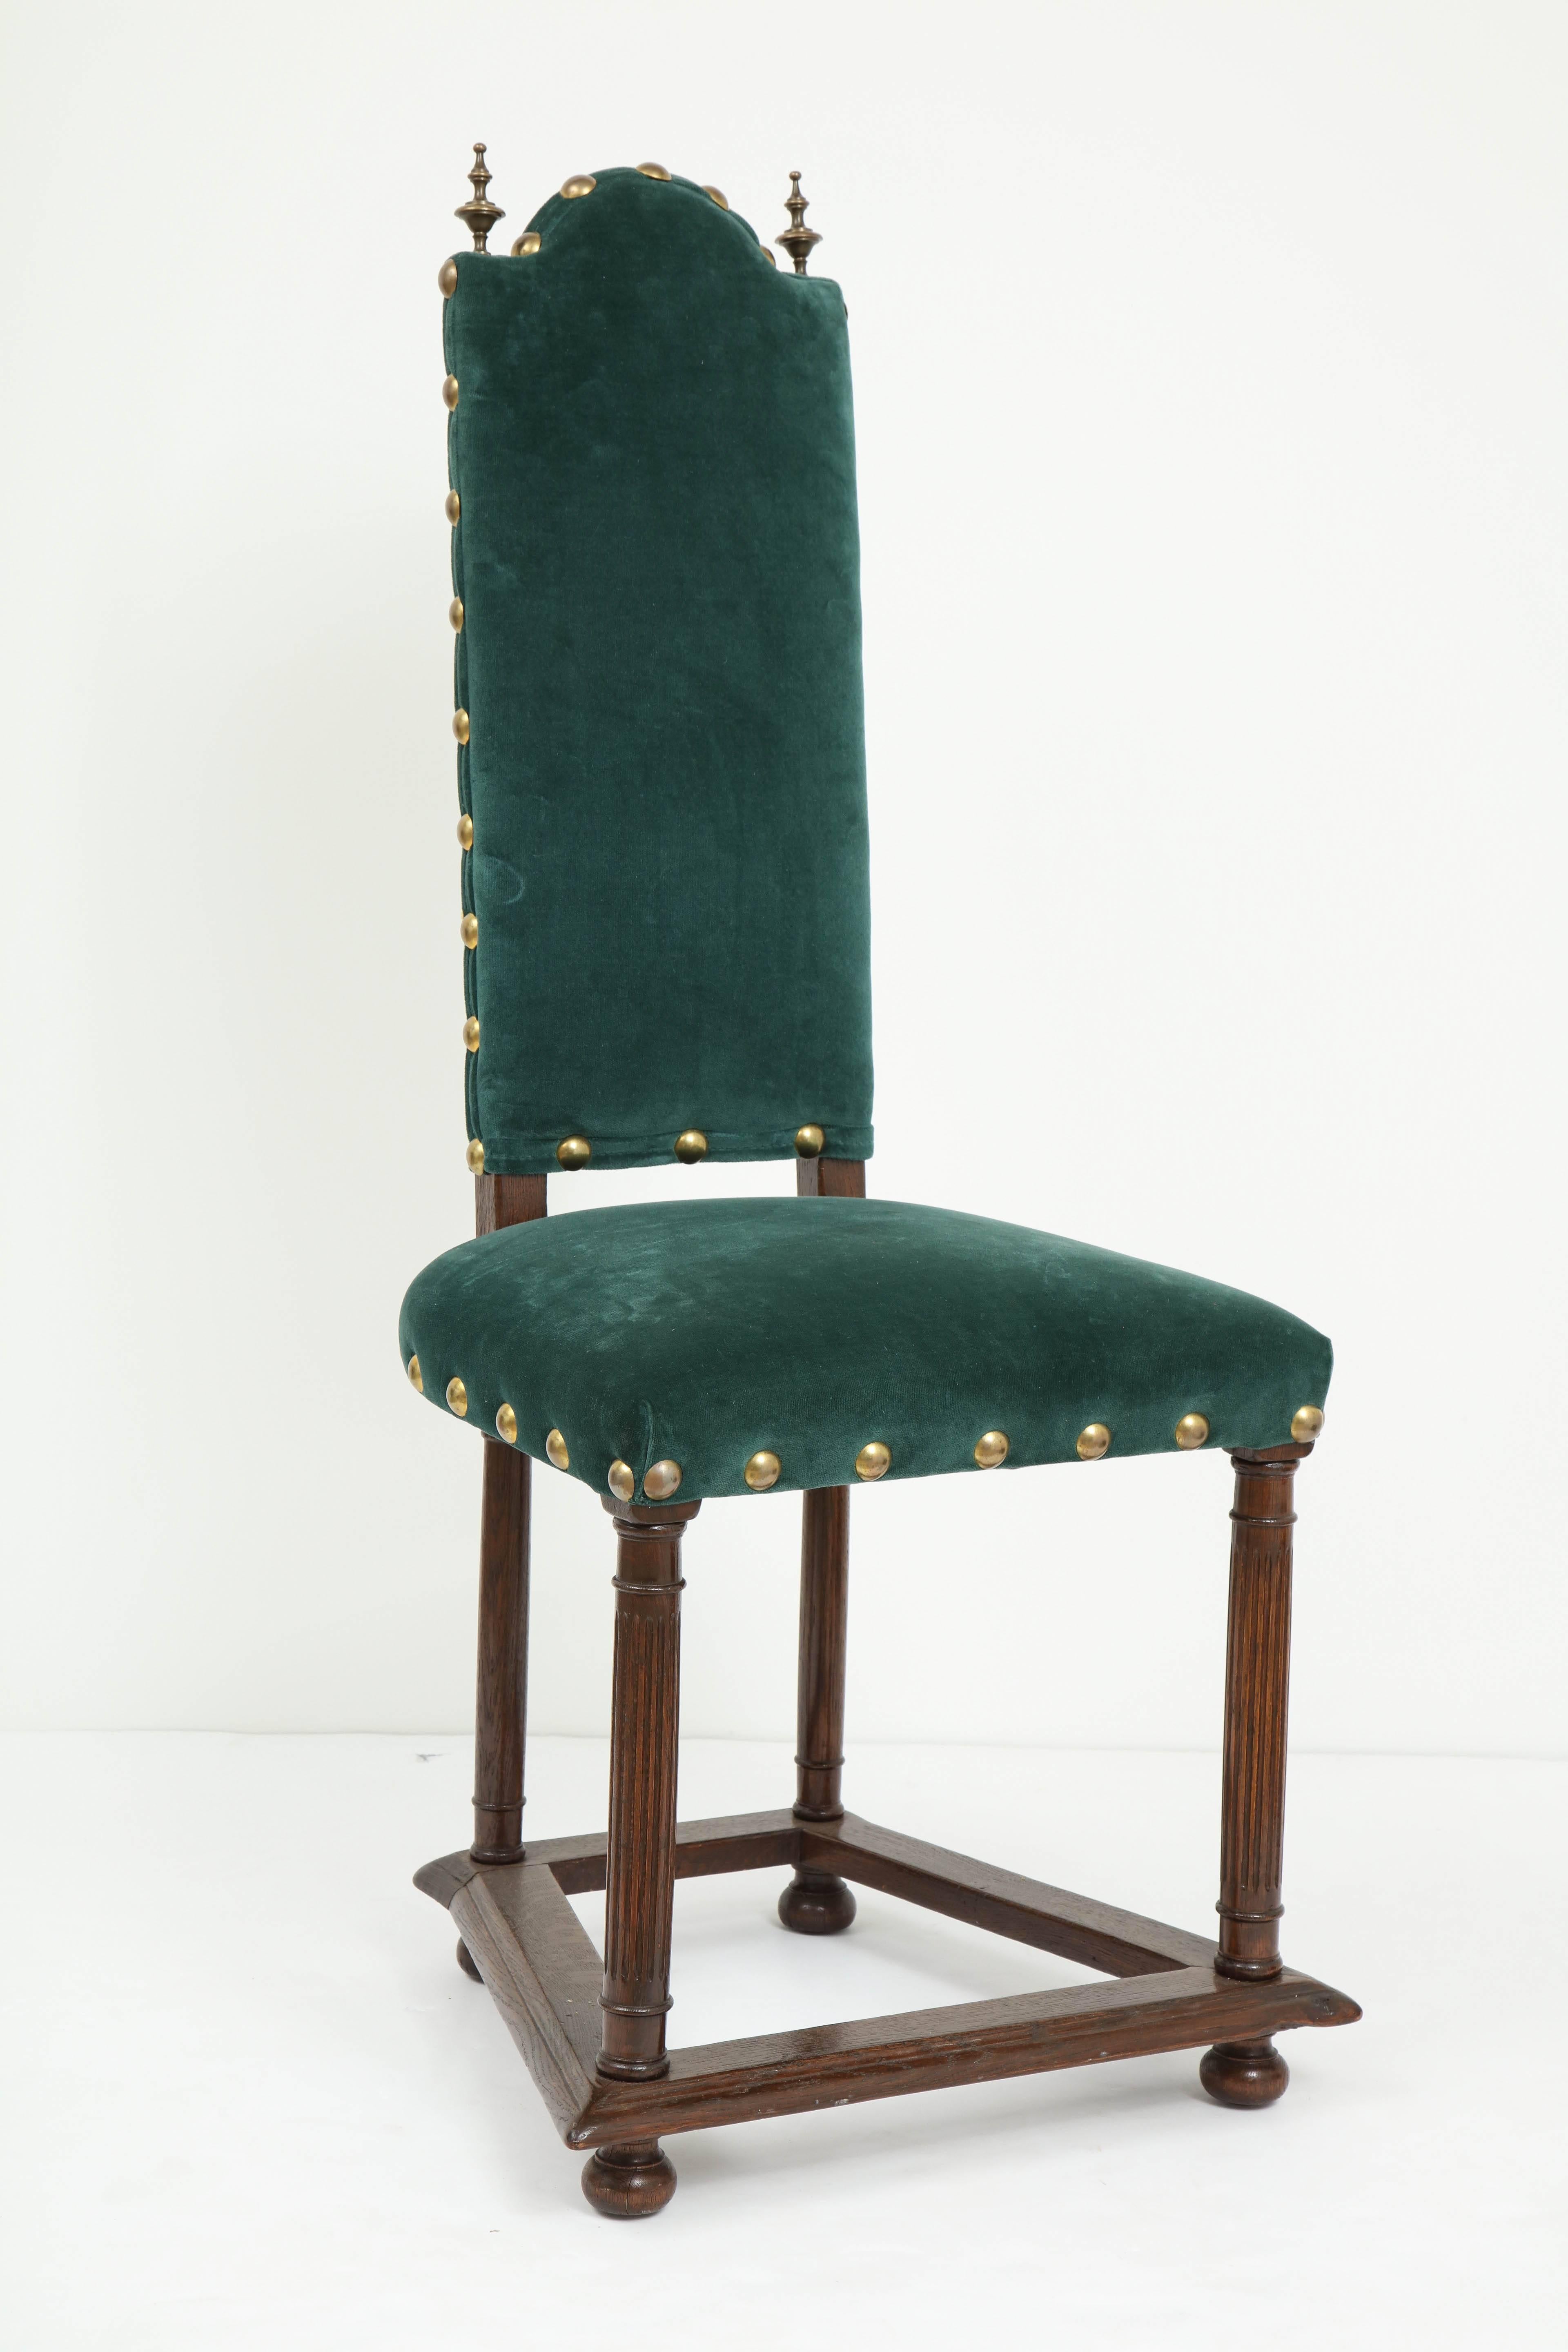 Pair of French Jacobean style side chairs with solid oak frames and upholstered in a blue or green moleskin velvet. Chairs feature bronze finials and large nailhead trim. Stamped, Made in France on bottom.